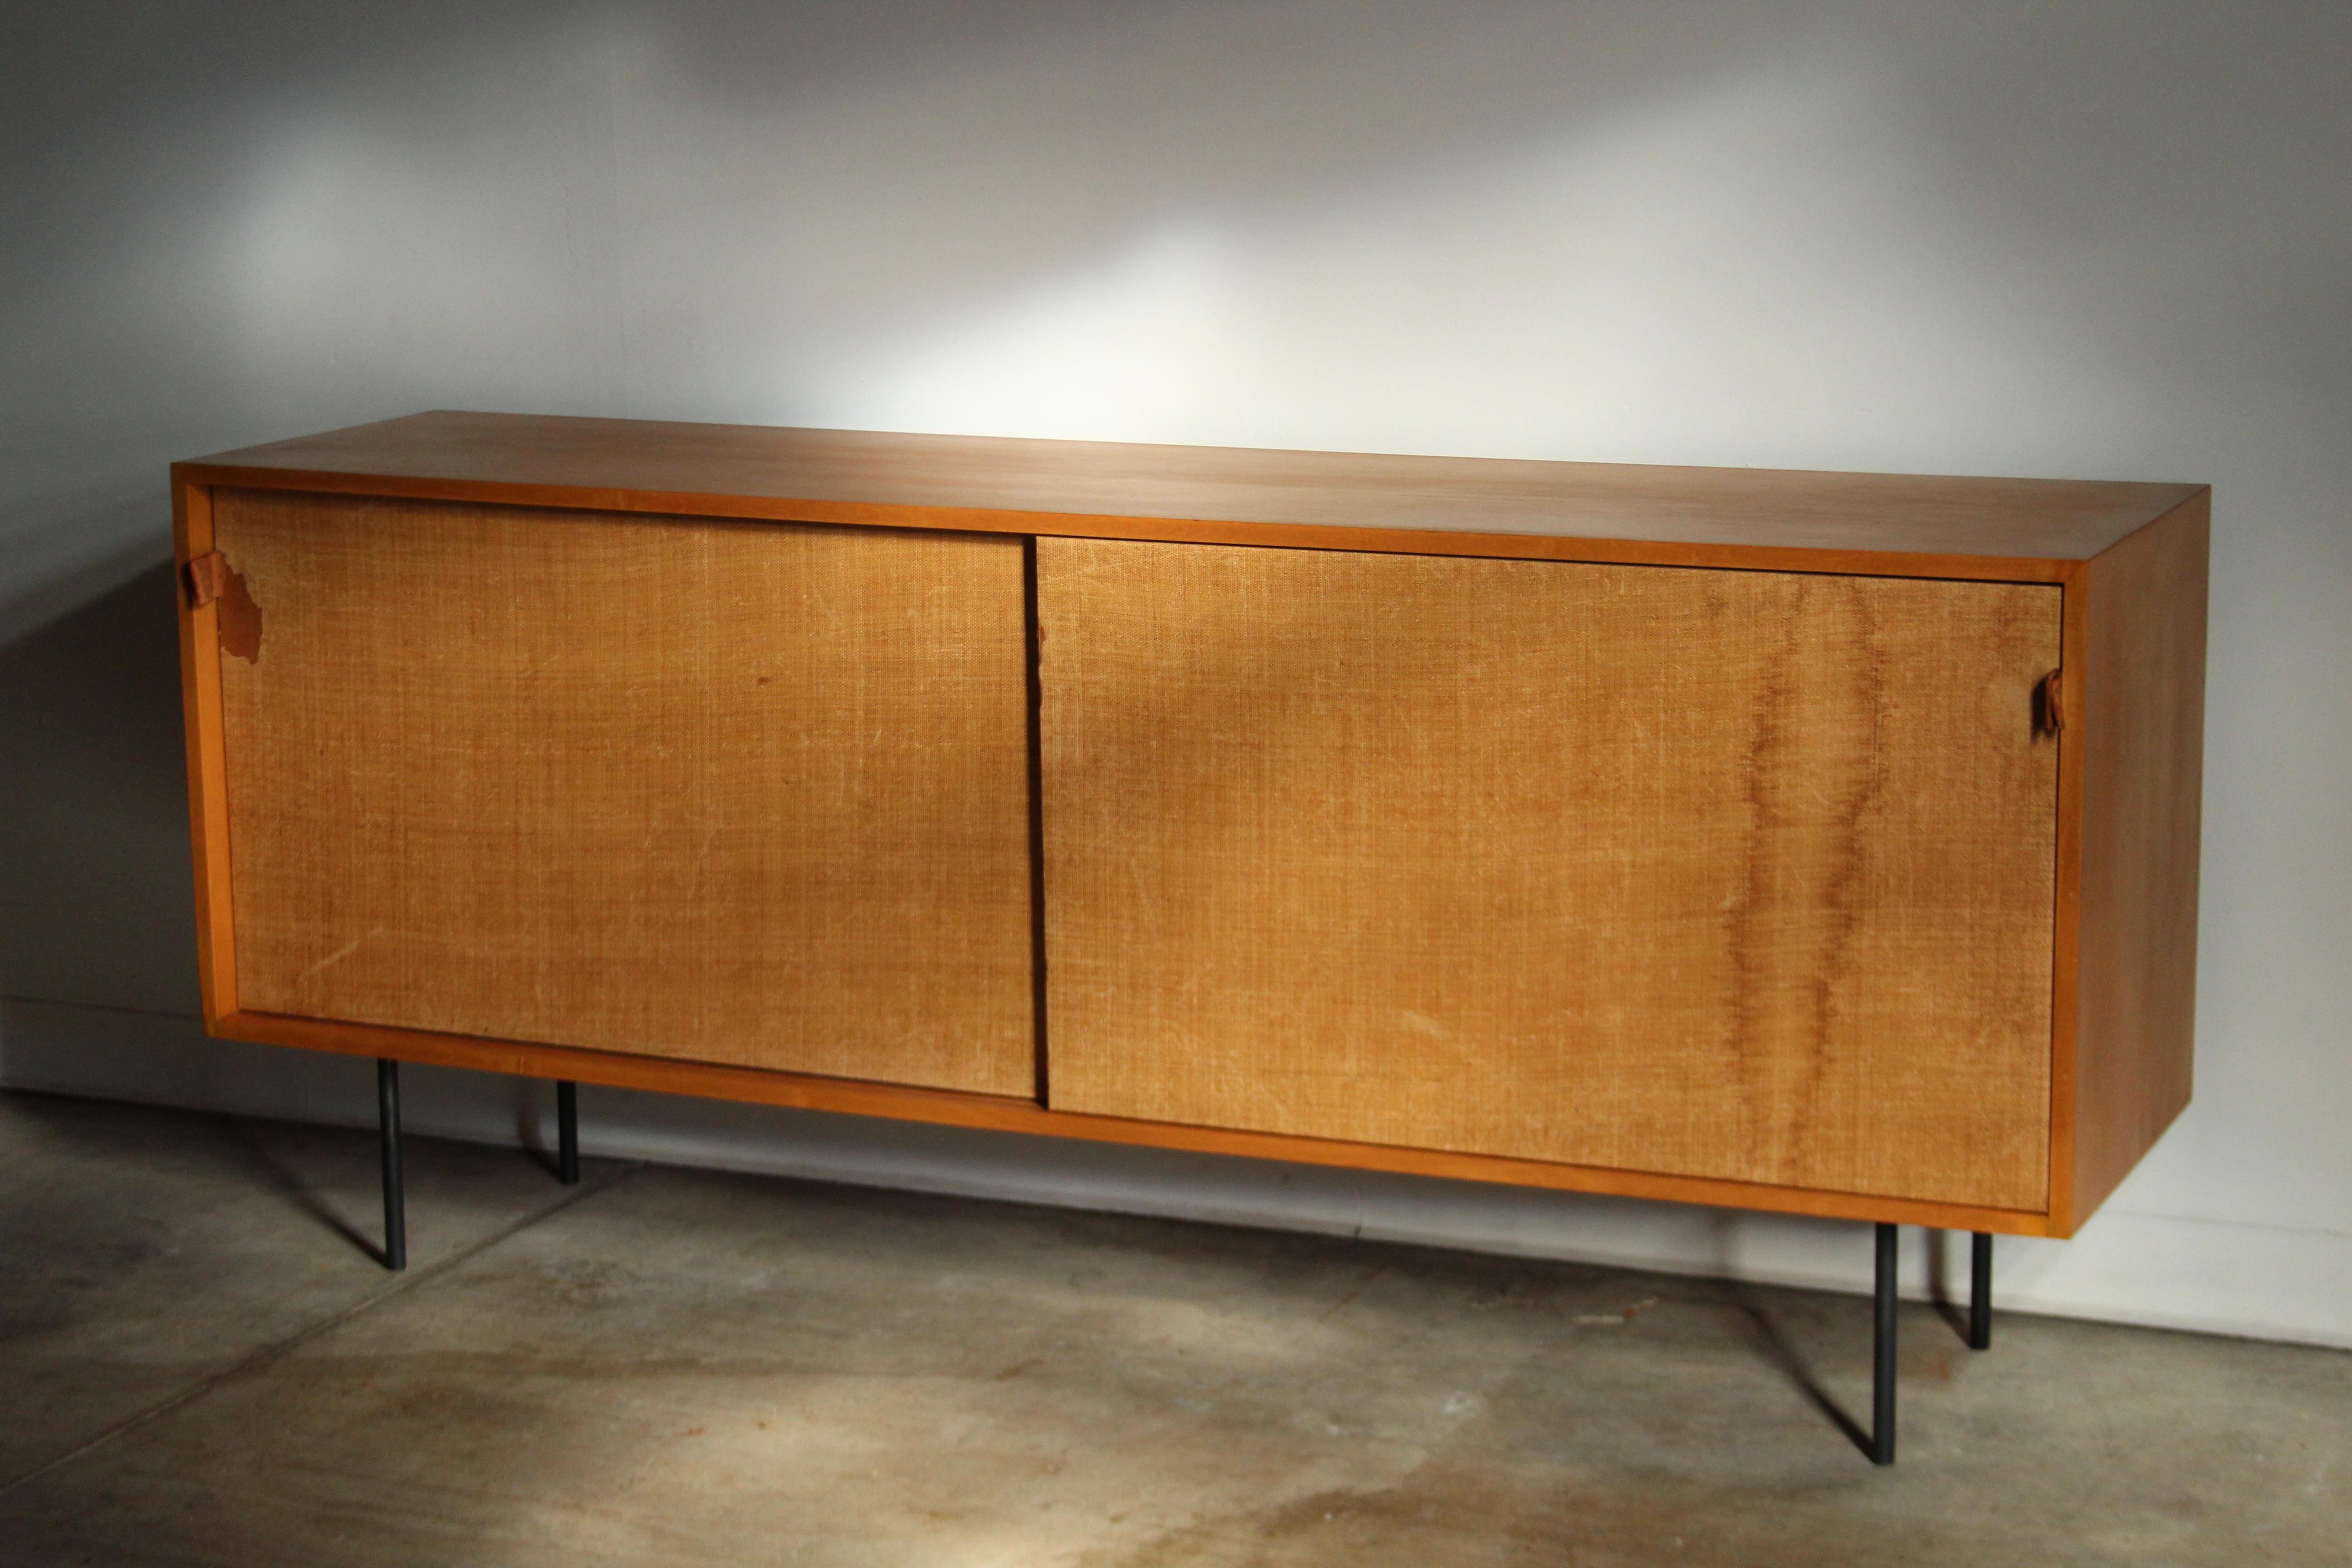 Natural Fiber Florence Knoll 'Model 116' Iron Leg and Grass Cloth Credenza for Knoll, 1950s For Sale